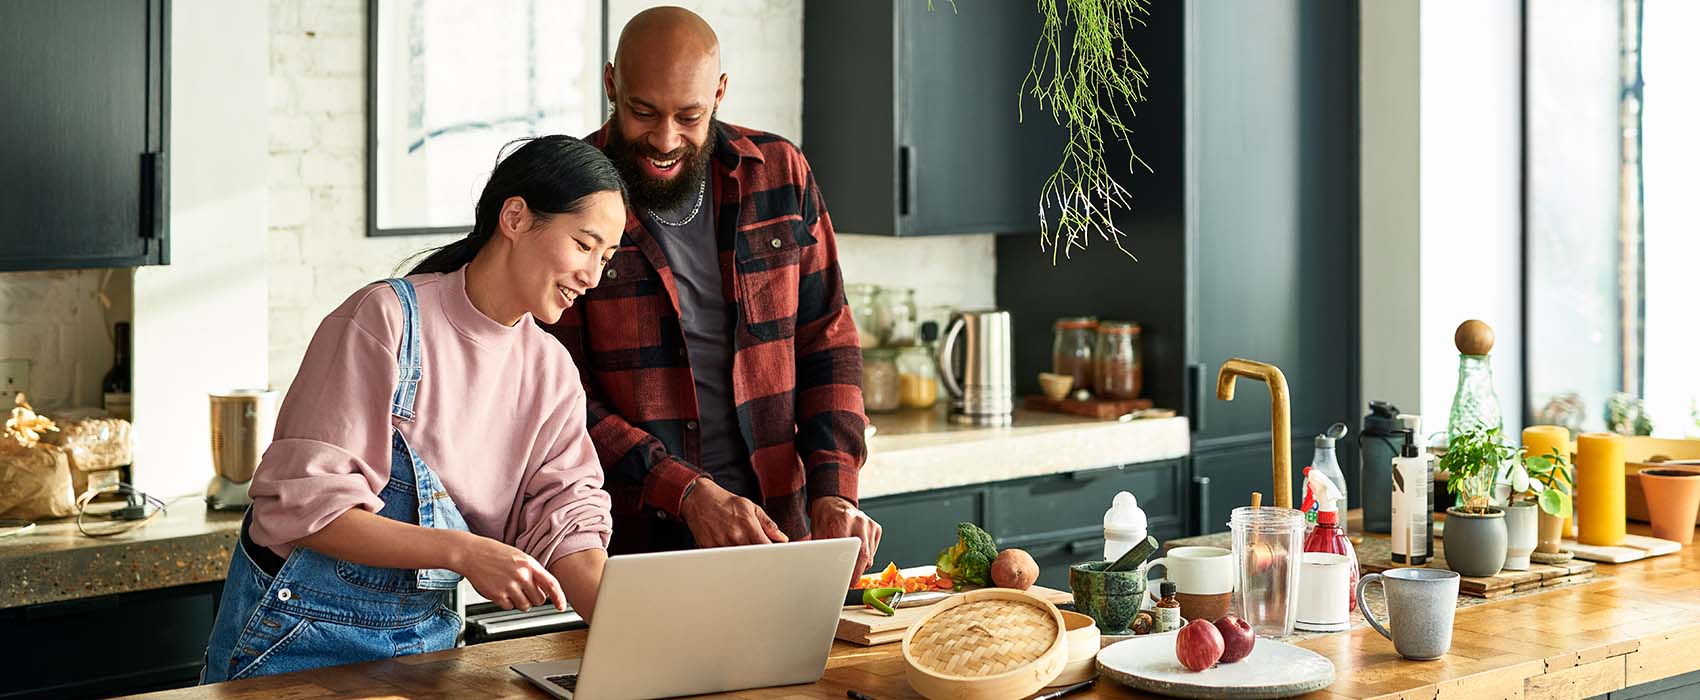 Couple looking at recipes on a laptop in their kitchen.